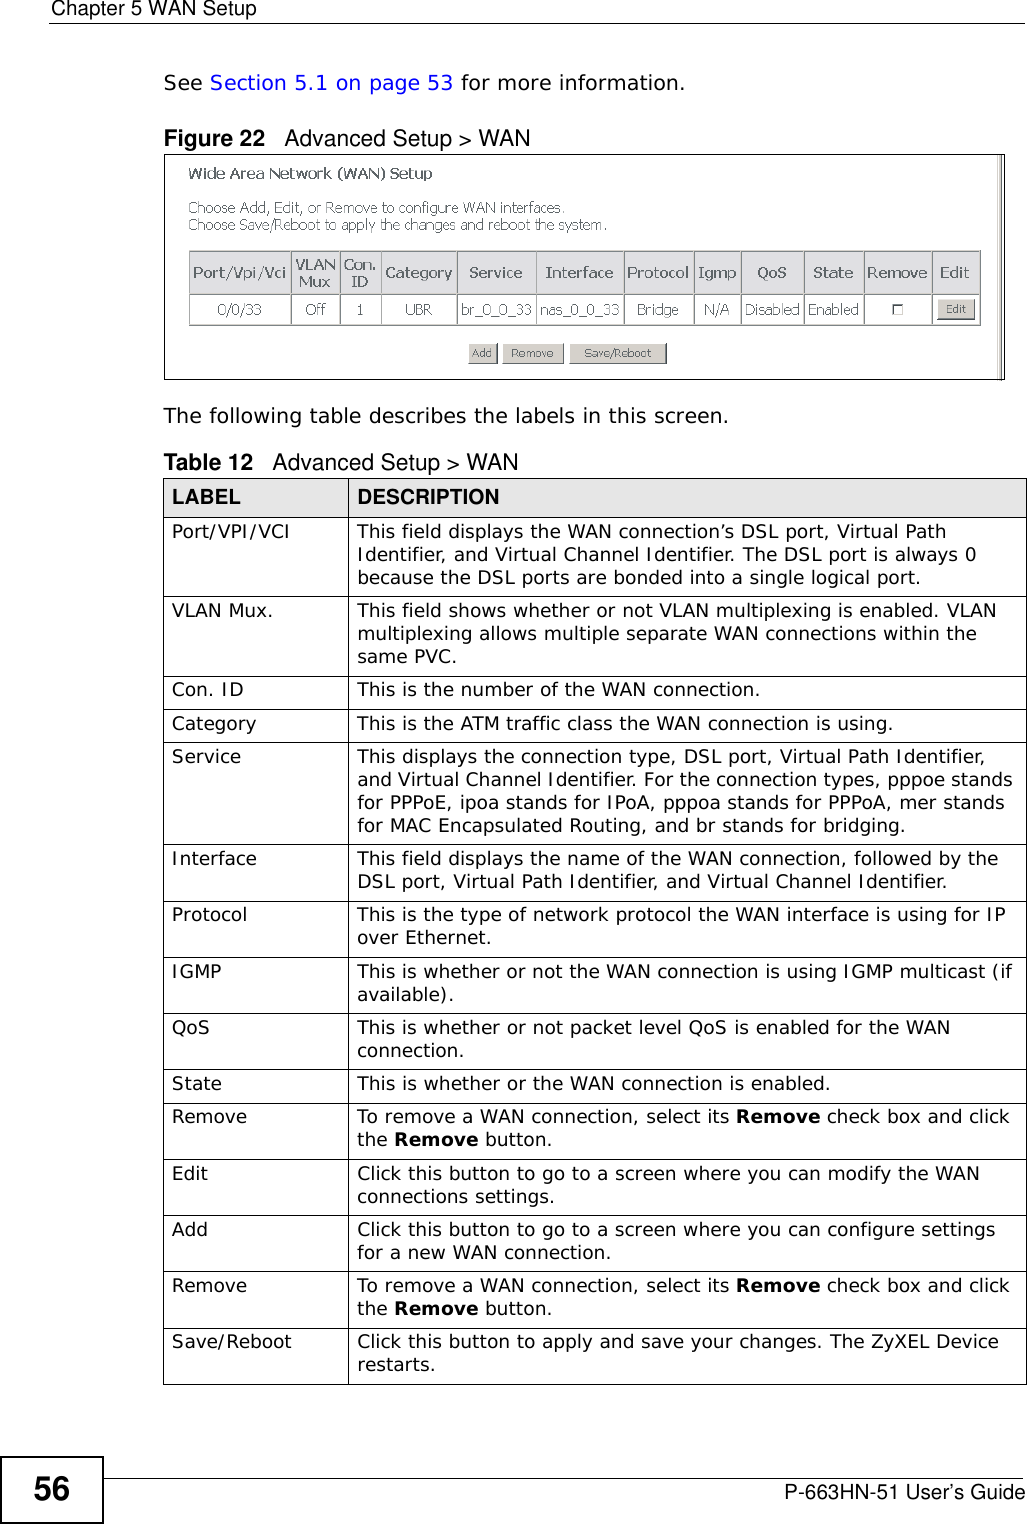 Chapter 5 WAN SetupP-663HN-51 User’s Guide56See Section 5.1 on page 53 for more information. Figure 22   Advanced Setup &gt; WANThe following table describes the labels in this screen.  Table 12   Advanced Setup &gt; WANLABEL DESCRIPTIONPort/VPI/VCI This field displays the WAN connection’s DSL port, Virtual Path Identifier, and Virtual Channel Identifier. The DSL port is always 0 because the DSL ports are bonded into a single logical port.VLAN Mux. This field shows whether or not VLAN multiplexing is enabled. VLAN multiplexing allows multiple separate WAN connections within the same PVC. Con. ID This is the number of the WAN connection.Category This is the ATM traffic class the WAN connection is using. Service This displays the connection type, DSL port, Virtual Path Identifier, and Virtual Channel Identifier. For the connection types, pppoe stands for PPPoE, ipoa stands for IPoA, pppoa stands for PPPoA, mer stands for MAC Encapsulated Routing, and br stands for bridging.Interface This field displays the name of the WAN connection, followed by the DSL port, Virtual Path Identifier, and Virtual Channel Identifier. Protocol This is the type of network protocol the WAN interface is using for IP over Ethernet.IGMP This is whether or not the WAN connection is using IGMP multicast (if available).QoS This is whether or not packet level QoS is enabled for the WAN connection.State This is whether or the WAN connection is enabled.Remove To remove a WAN connection, select its Remove check box and click the Remove button. Edit Click this button to go to a screen where you can modify the WAN connections settings.Add Click this button to go to a screen where you can configure settings for a new WAN connection.Remove To remove a WAN connection, select its Remove check box and click the Remove button. Save/Reboot Click this button to apply and save your changes. The ZyXEL Device restarts. 